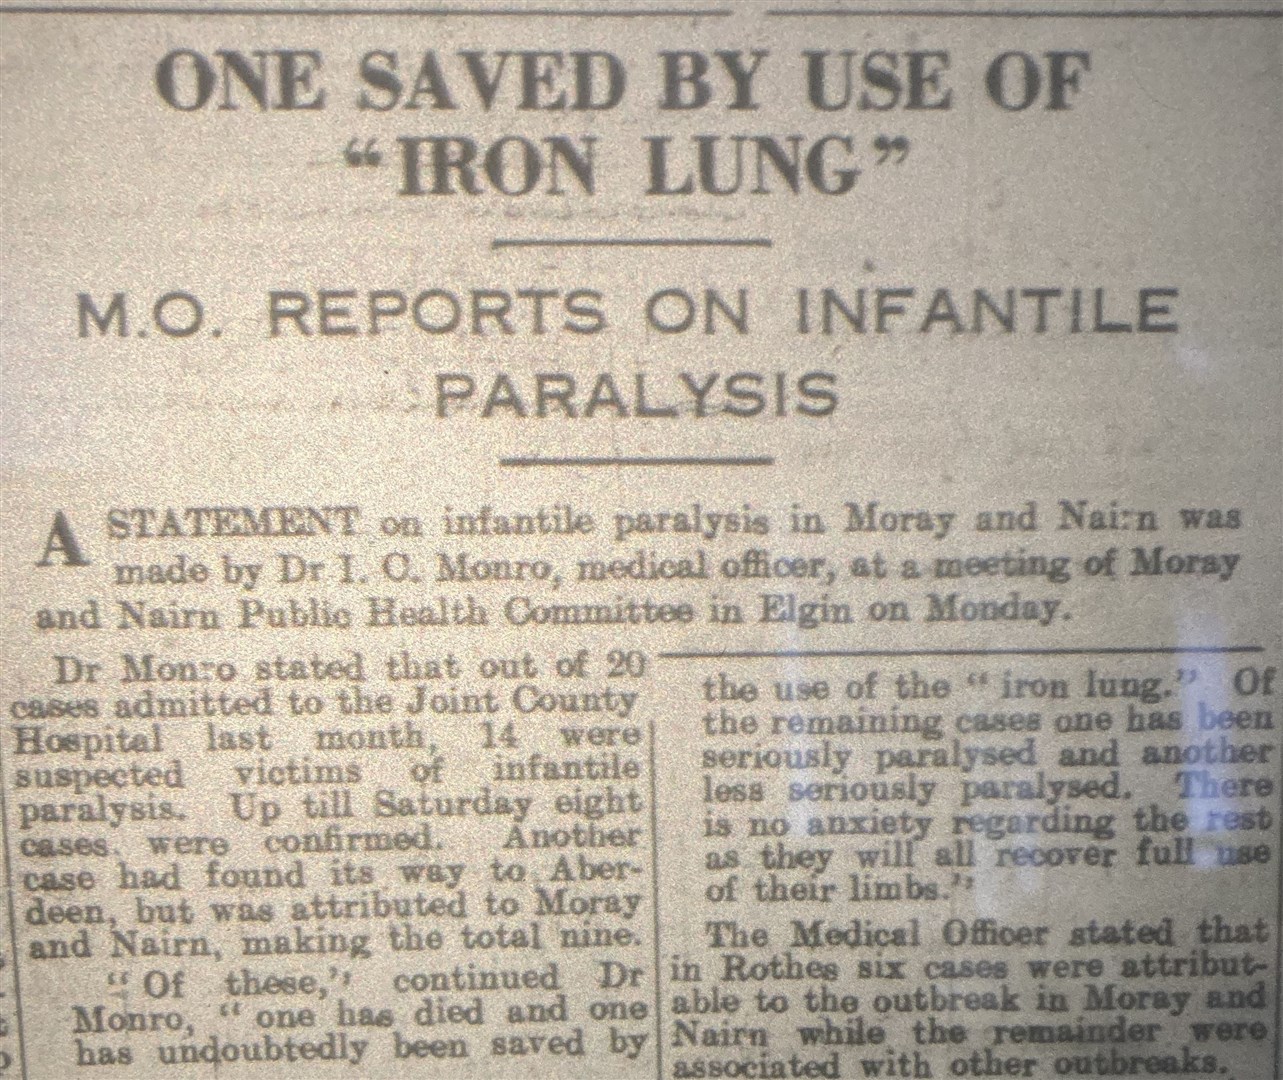 A report in the Northern Scot of September 6, 1947 tells of the use of an "iron lung" to save the life of a child with polio.